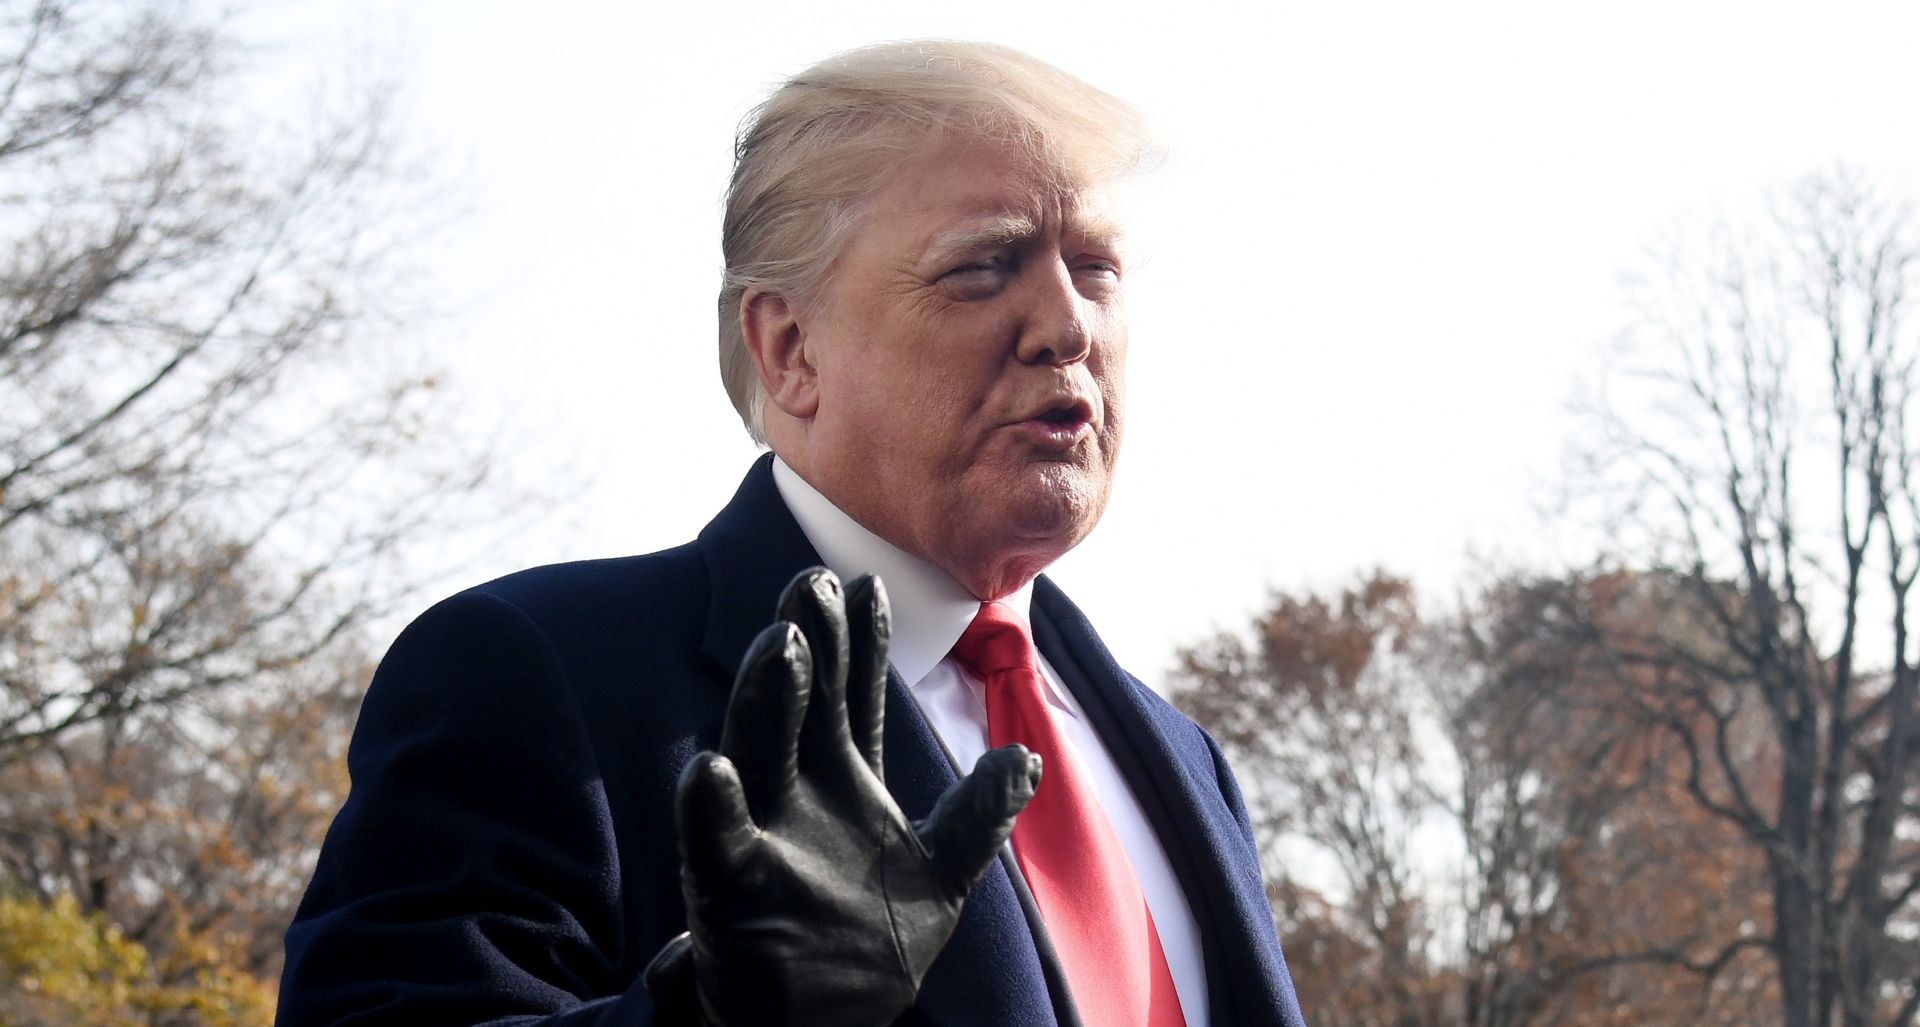 epa07218039 US President Donald J. Trump answers questions from the press while departing the White House in Washington, DC, USA, 08 December 2018. Trump said White House chief of staff John Kelly will resign by the end of the year, before departing for the 119th Army-Navy Football Game in Philadelphia, PA.  EPA/Olivier Douliery / POOL